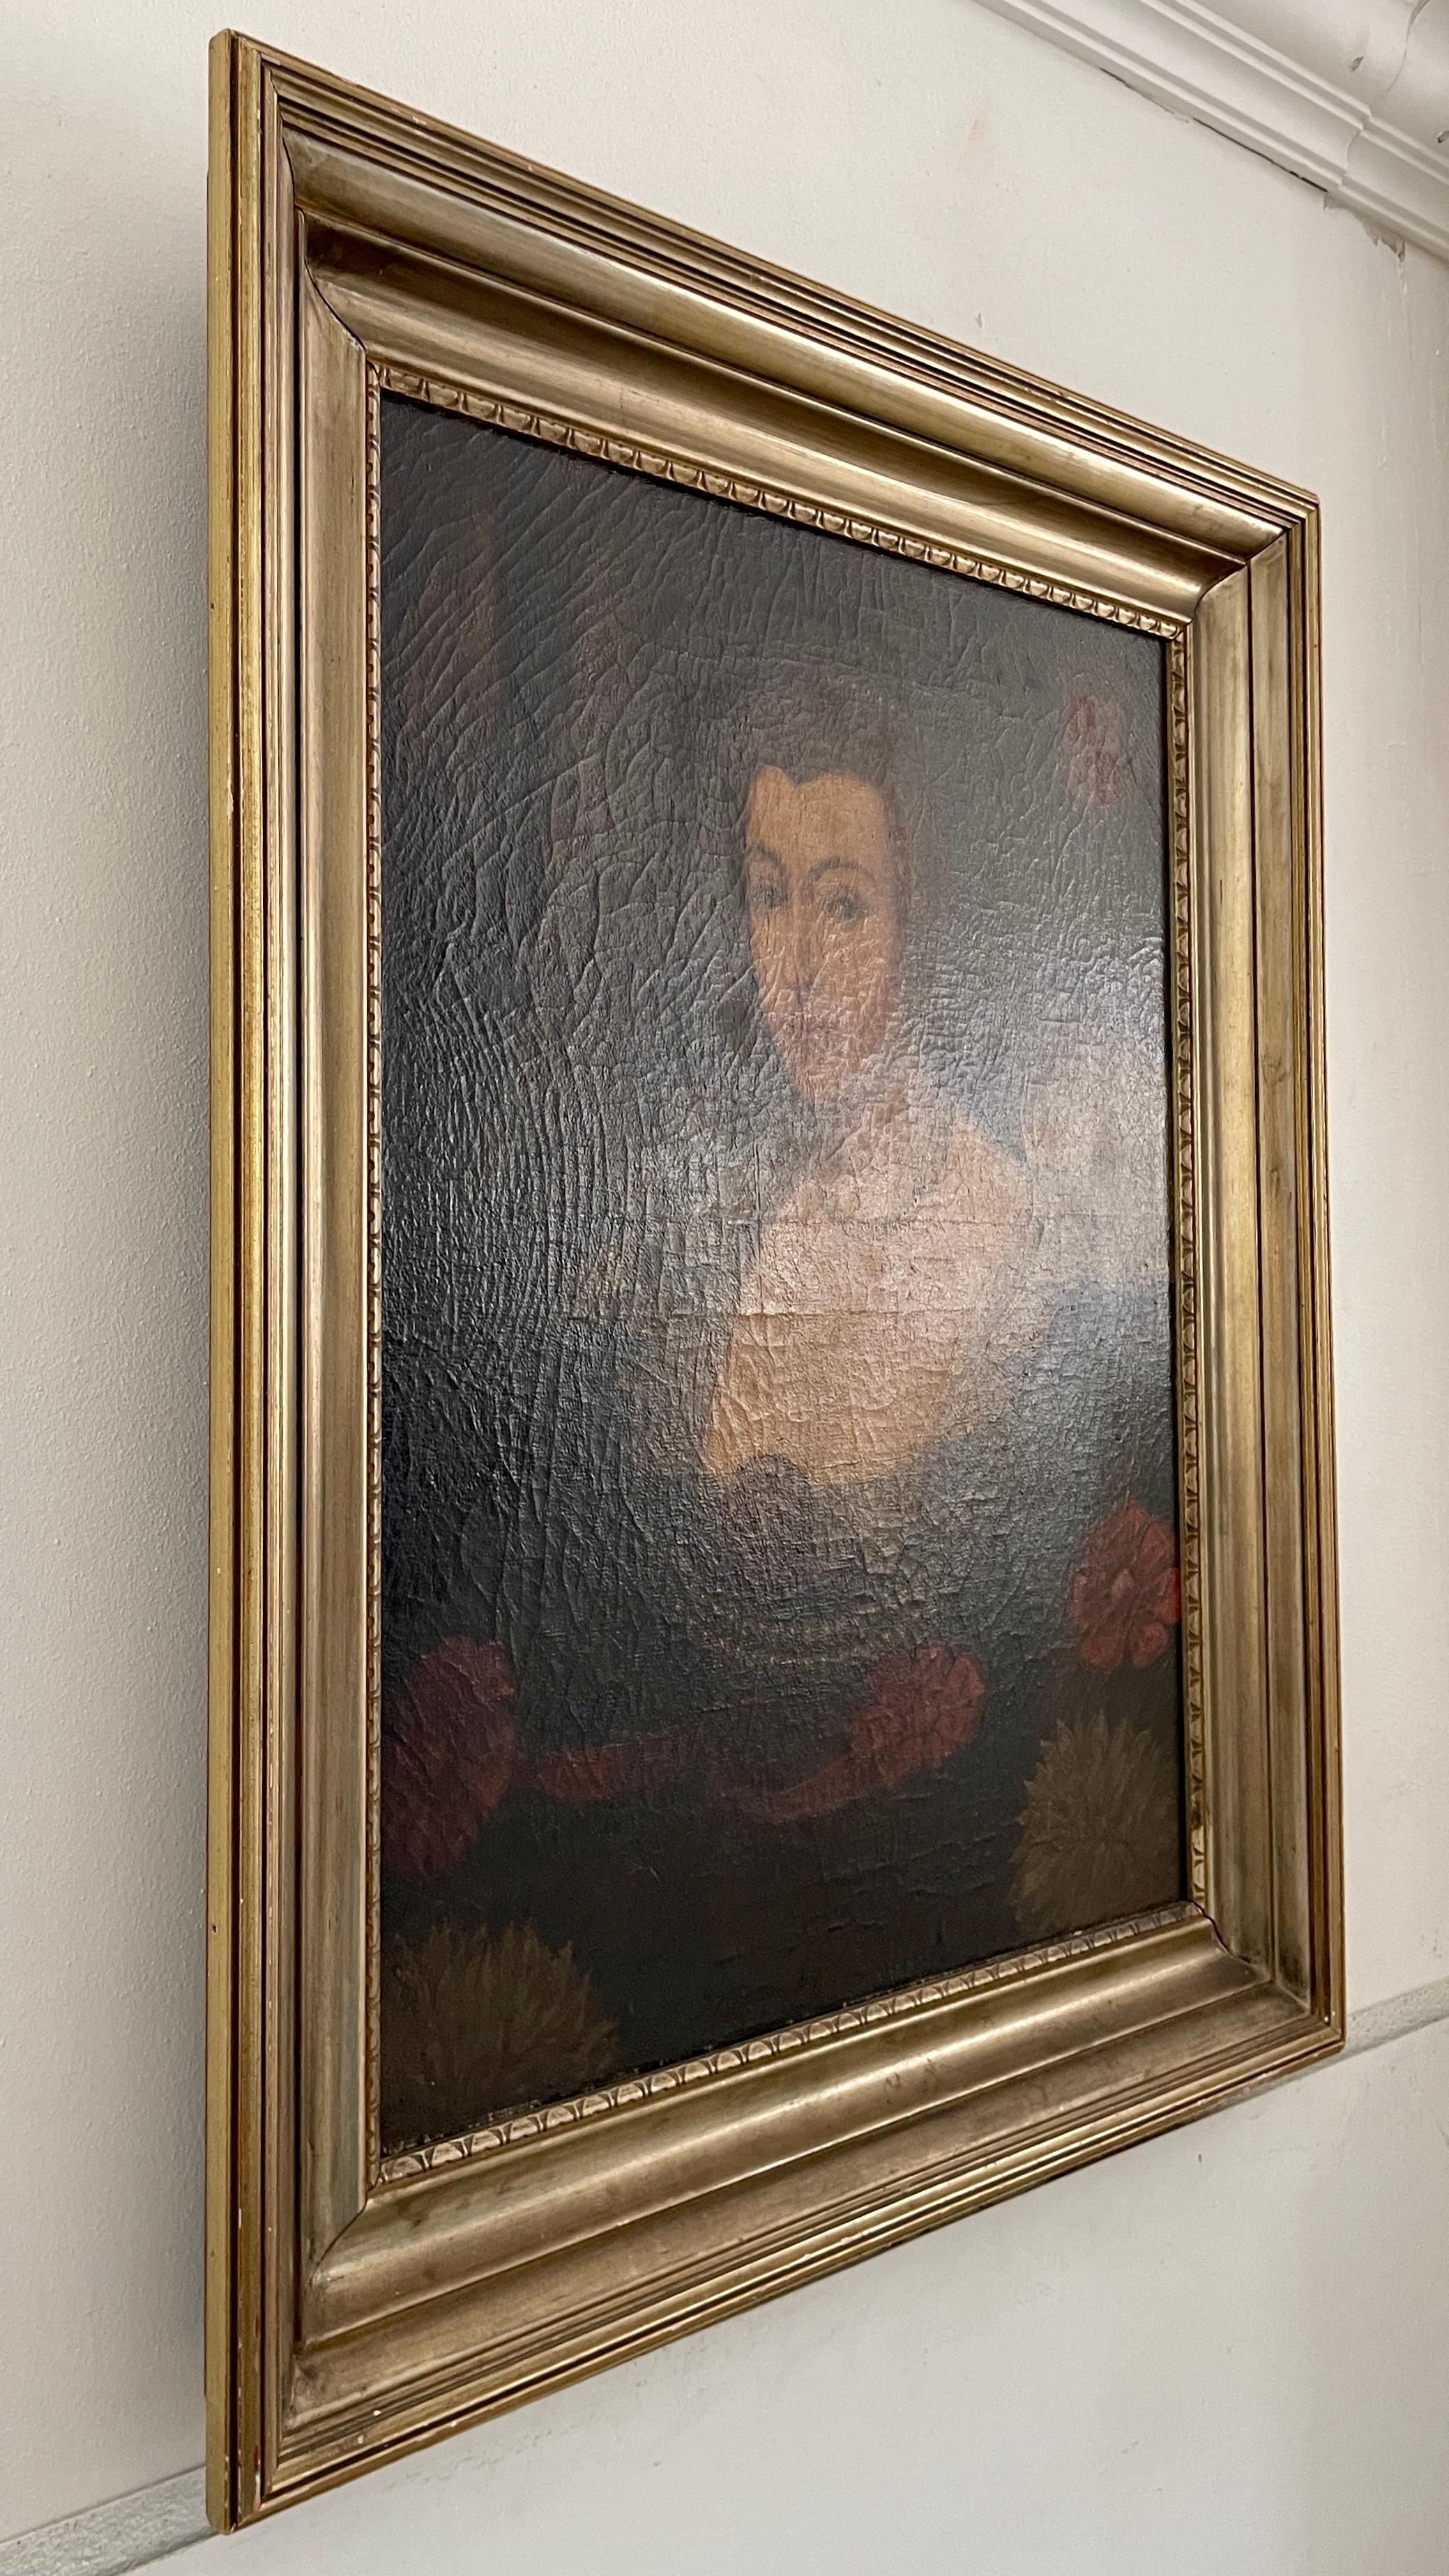 Portrait of a woman. In the French Style, fabulous details especially the details of the clothing. More of the Renaissance style clothing too. Add some French culture to your home.